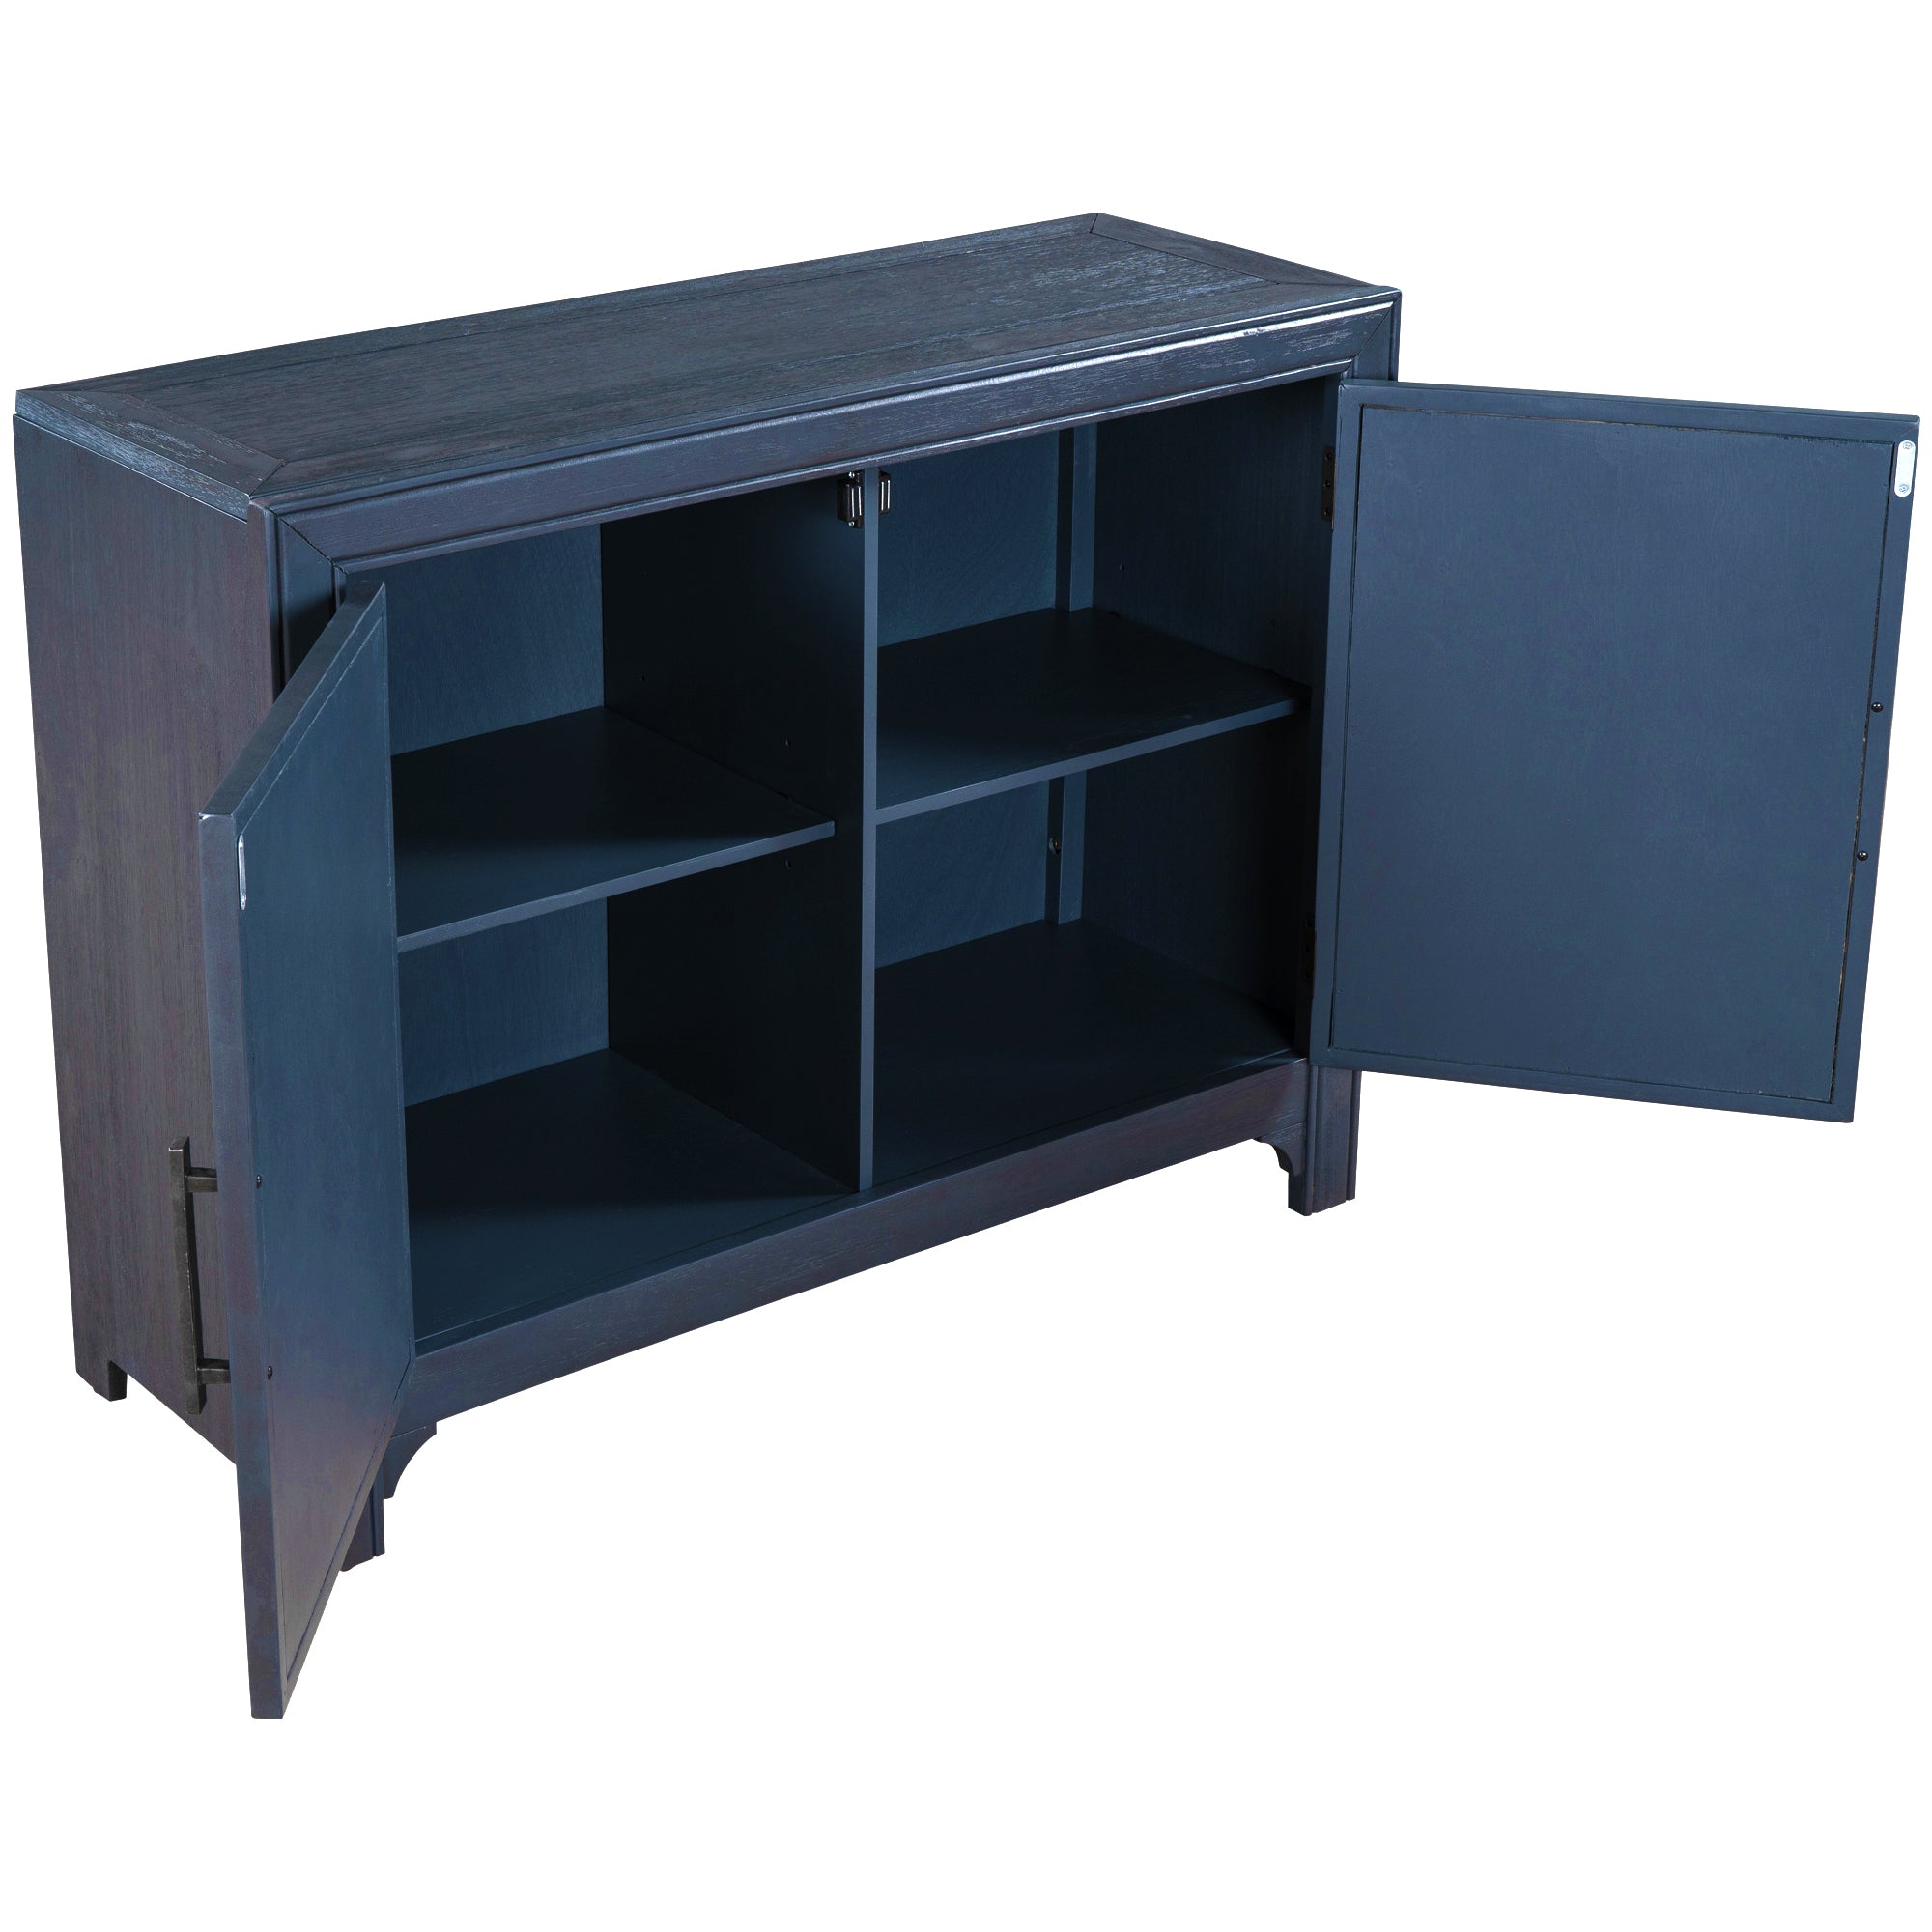 40‘’ Modern Console Table Sofa Table for Living Room with 2 Shelves (Blue)